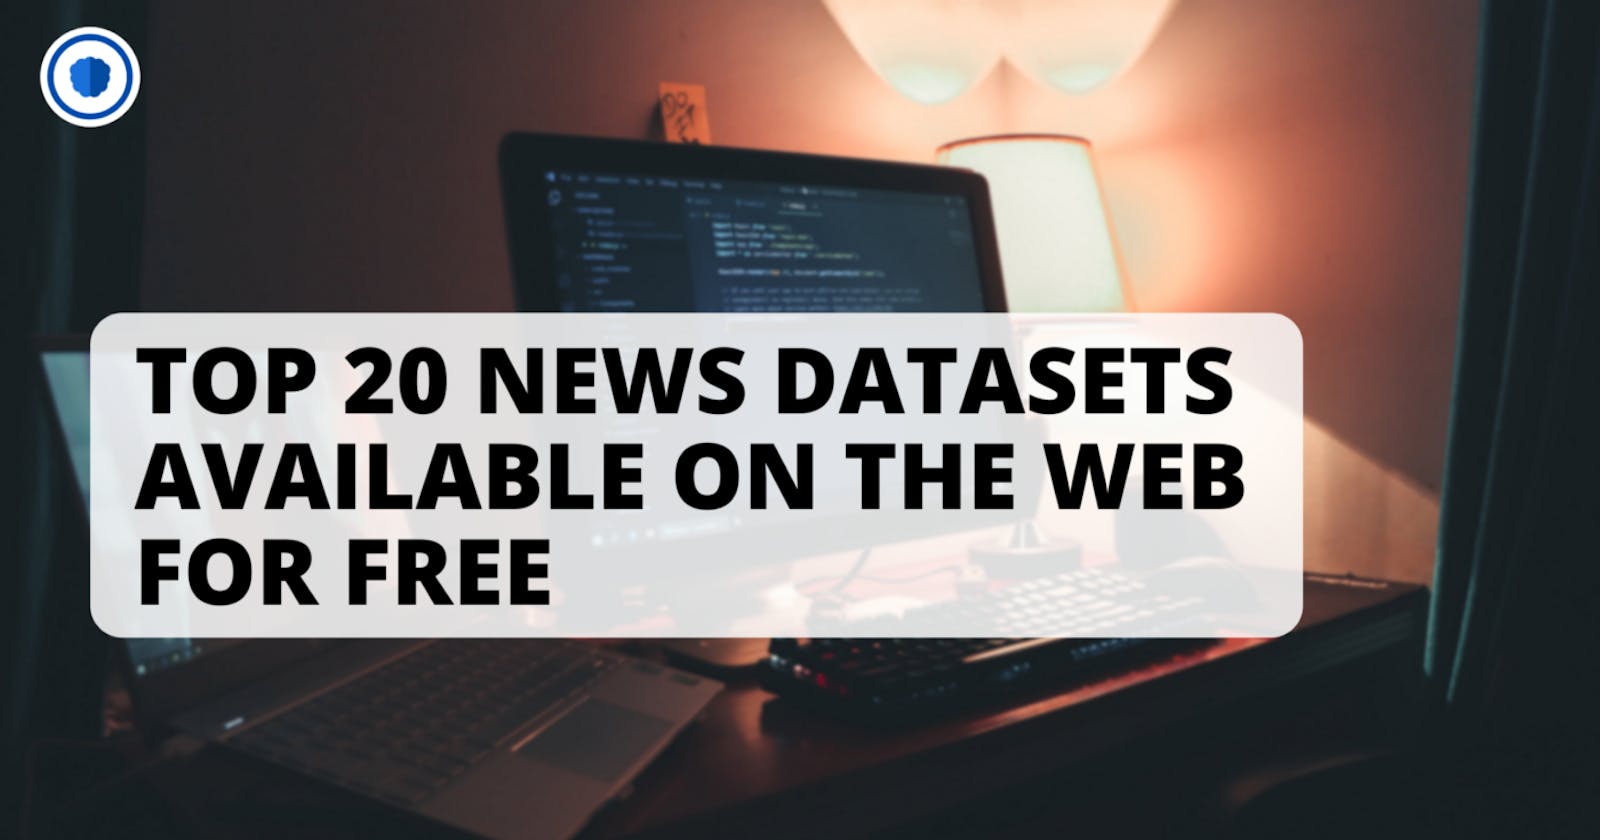 Top 20 news datasets available on the web for free